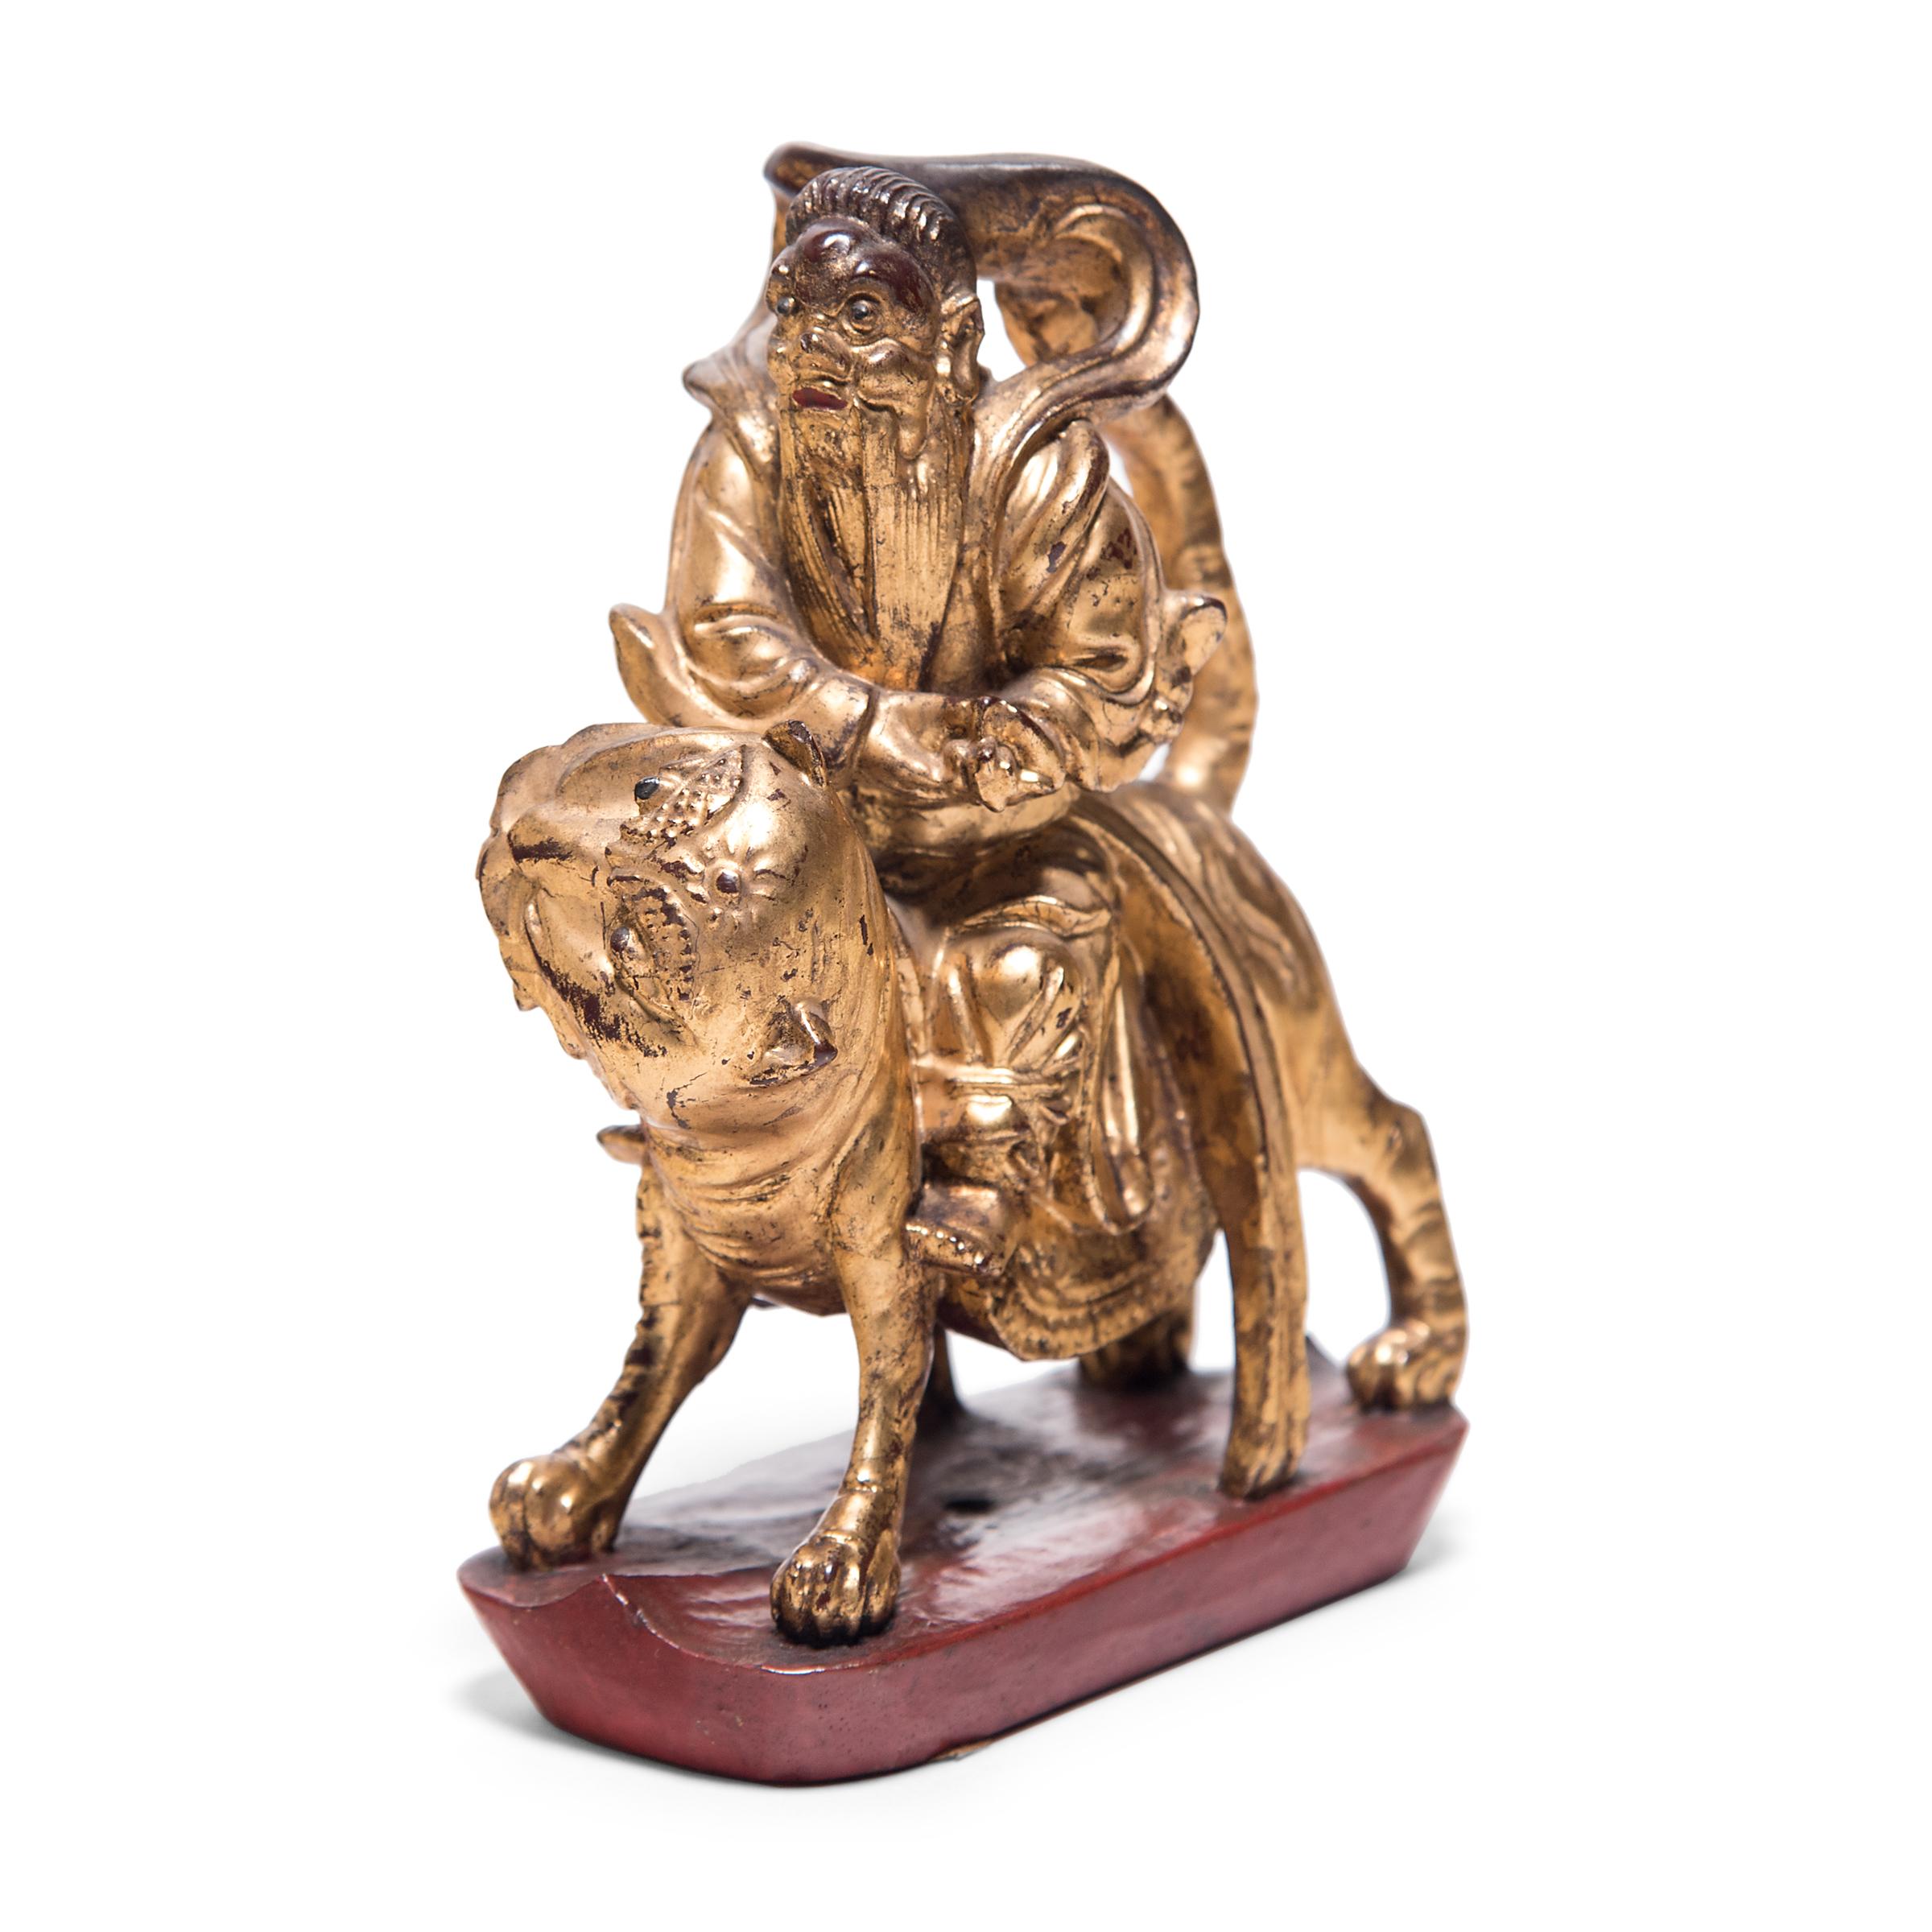 Lavishly pigmented and carved with intricate detail, this petite mythical figurine was originally a decorative element from an ornate 19th century bed surround. Dressed in flowing and riding on the back of a kingly lion, this elder figure depicts a